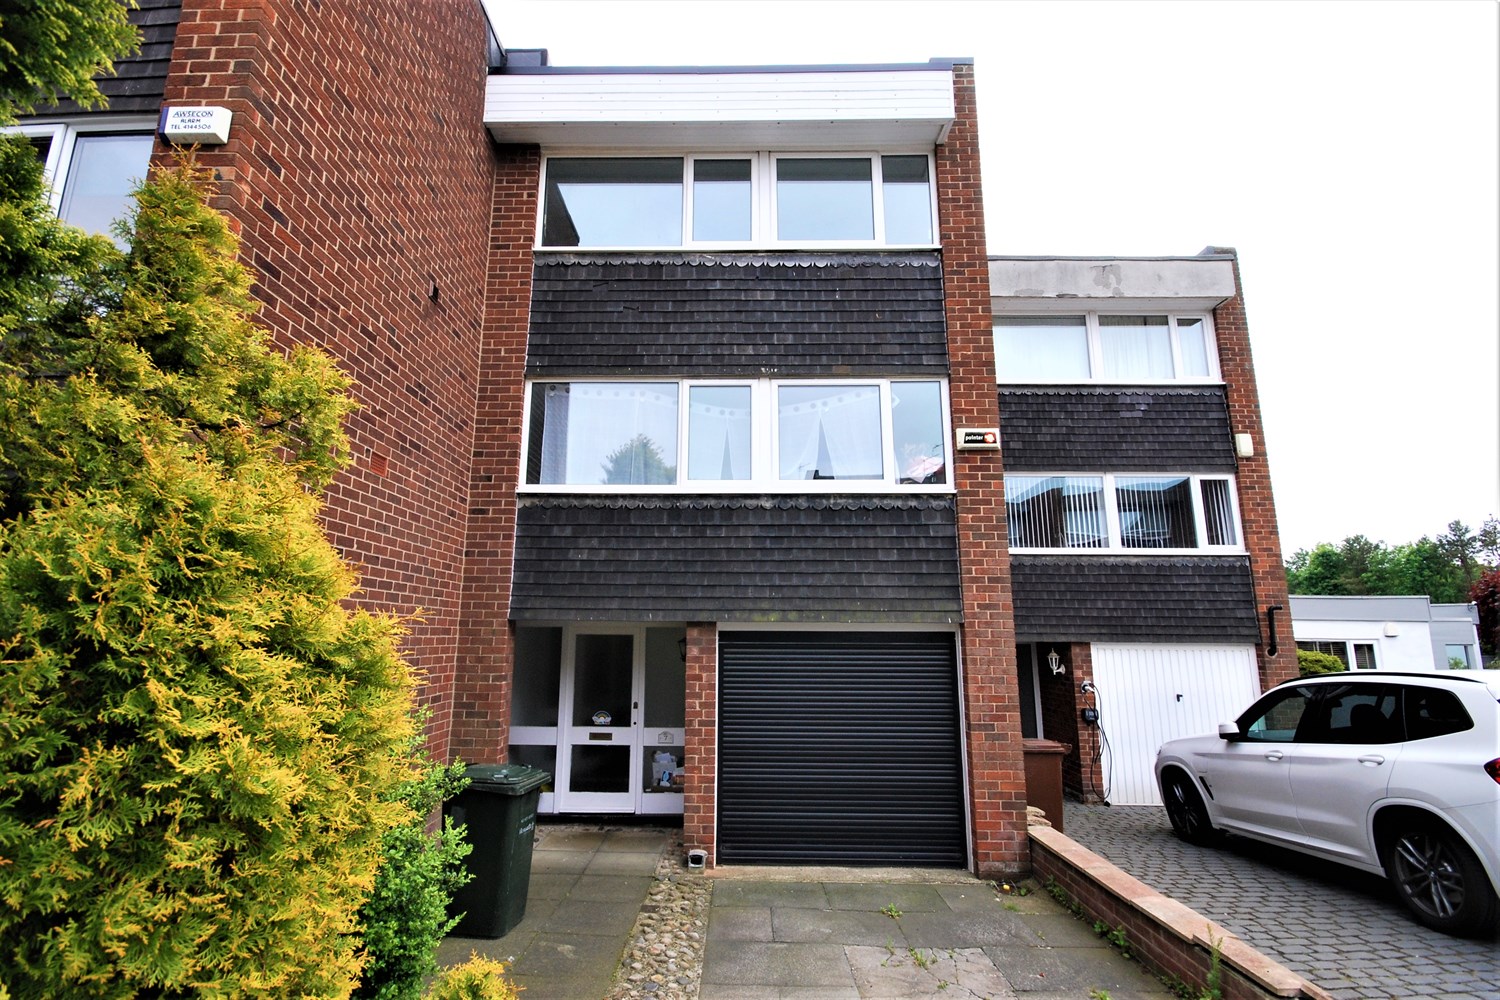 3 bed town house to rent in Brunton Park, Newcastle Upon Tyne - Property Image 1